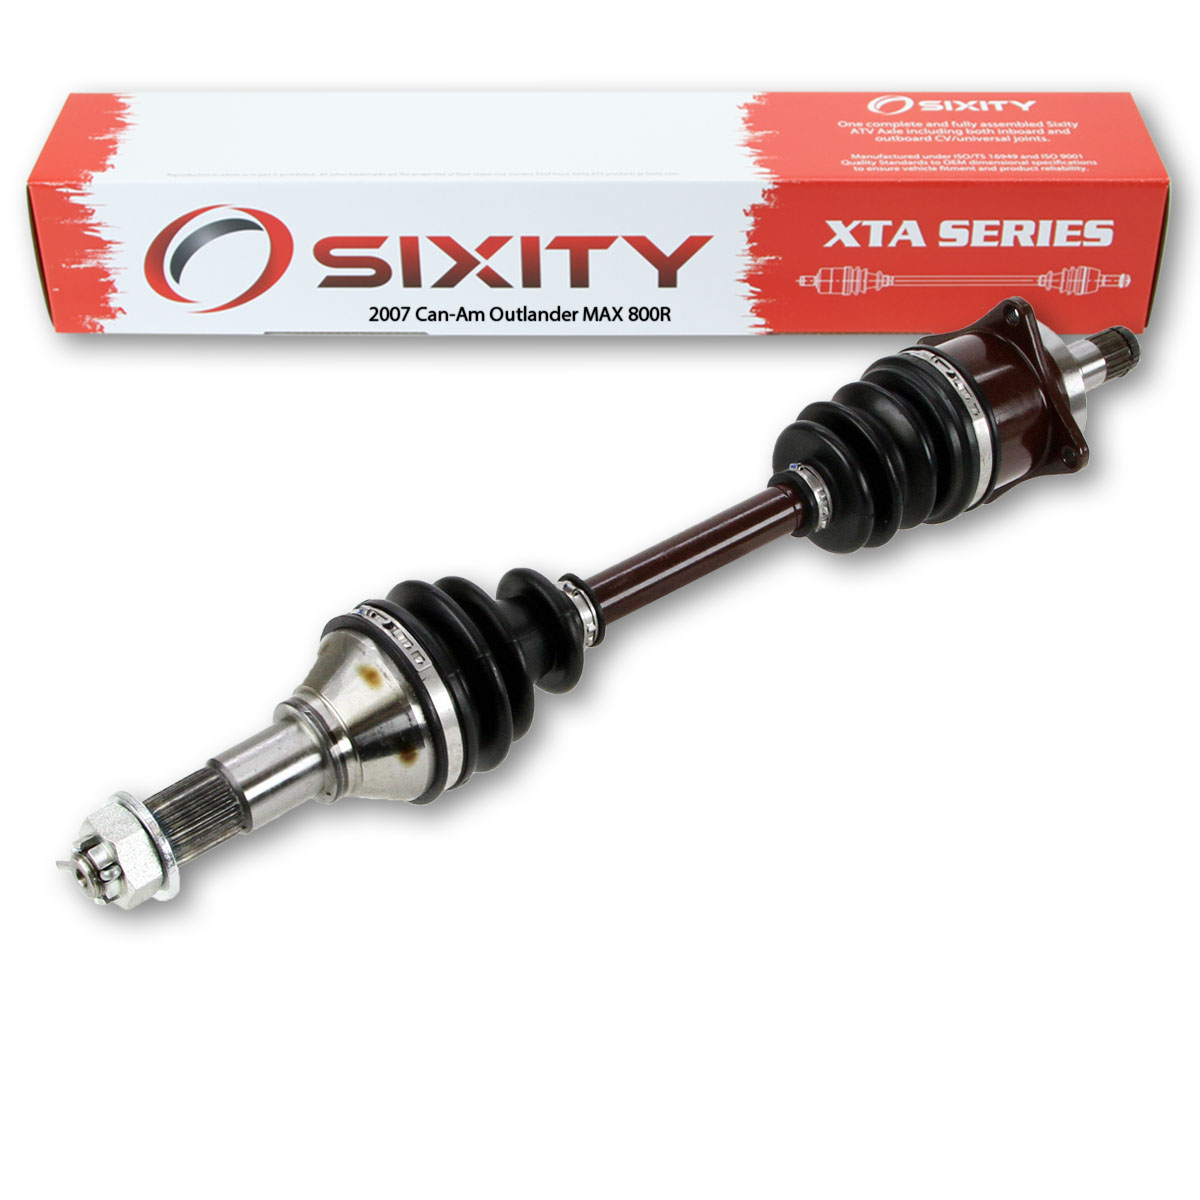 Sixity 2007 Can-Am Outlander MAX 800R 4X4 Front Left XTA ATV Axle